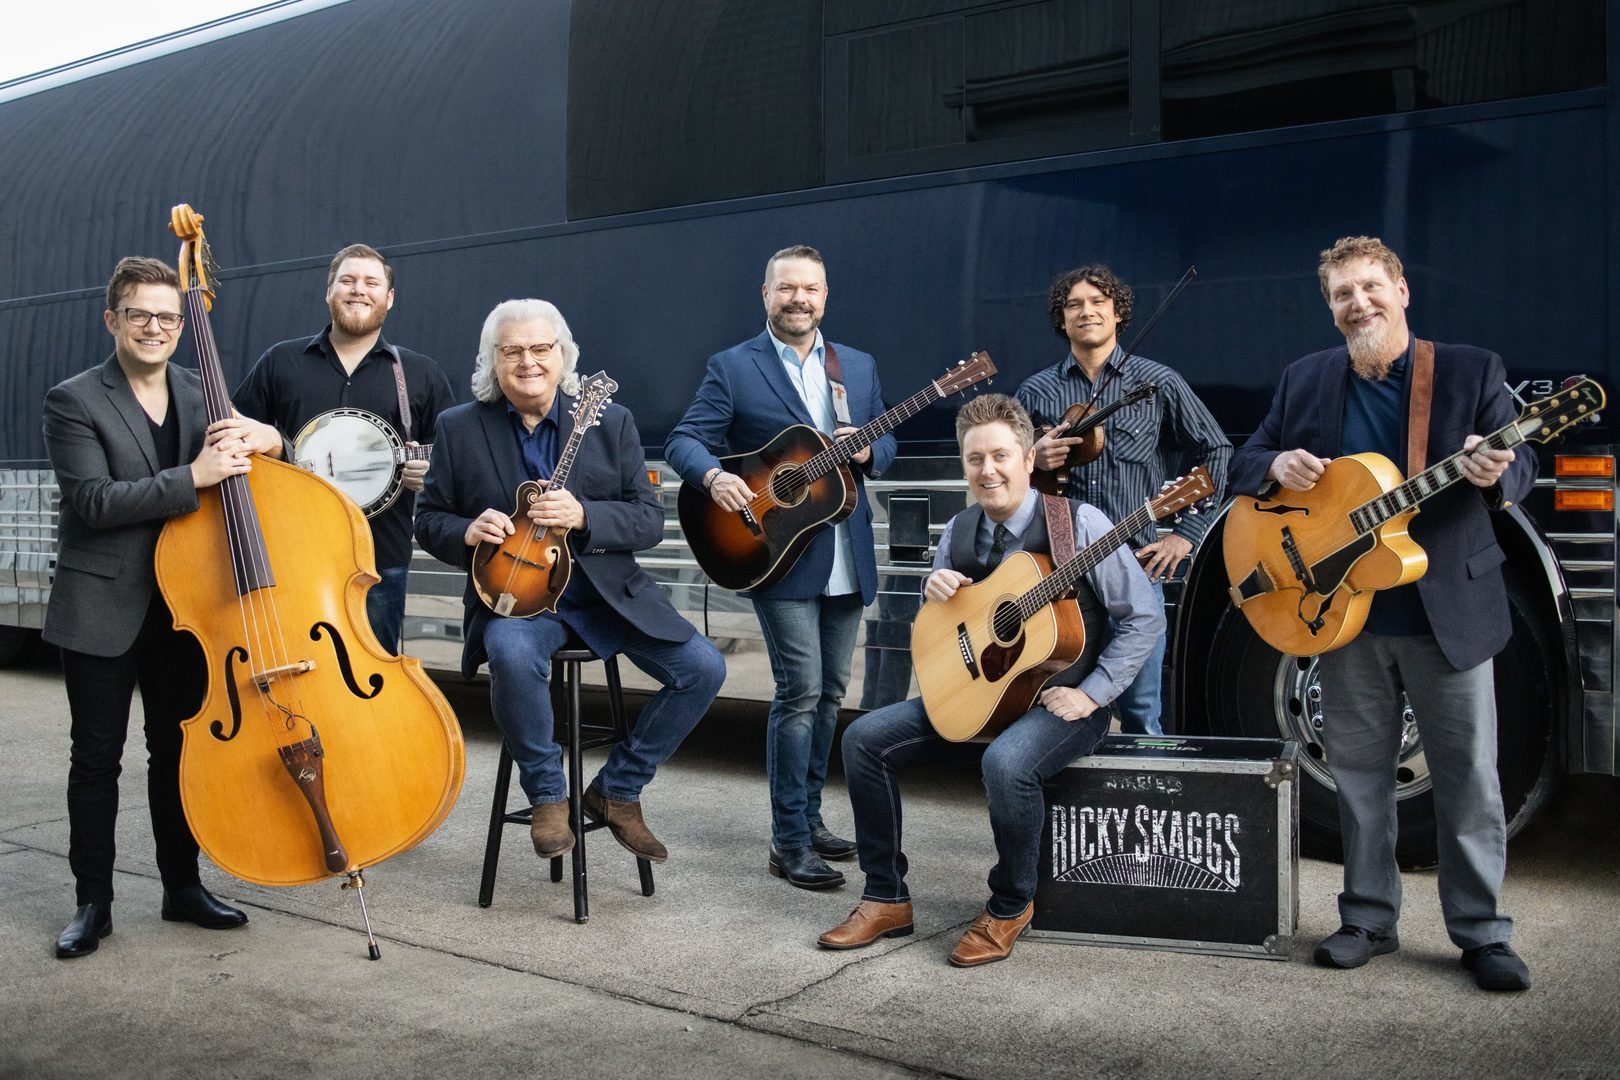 Ricky Skaggs and Kentucky Thunder with Blue Hazard and Jerry Allen, Stillwater, Minnesota, United States